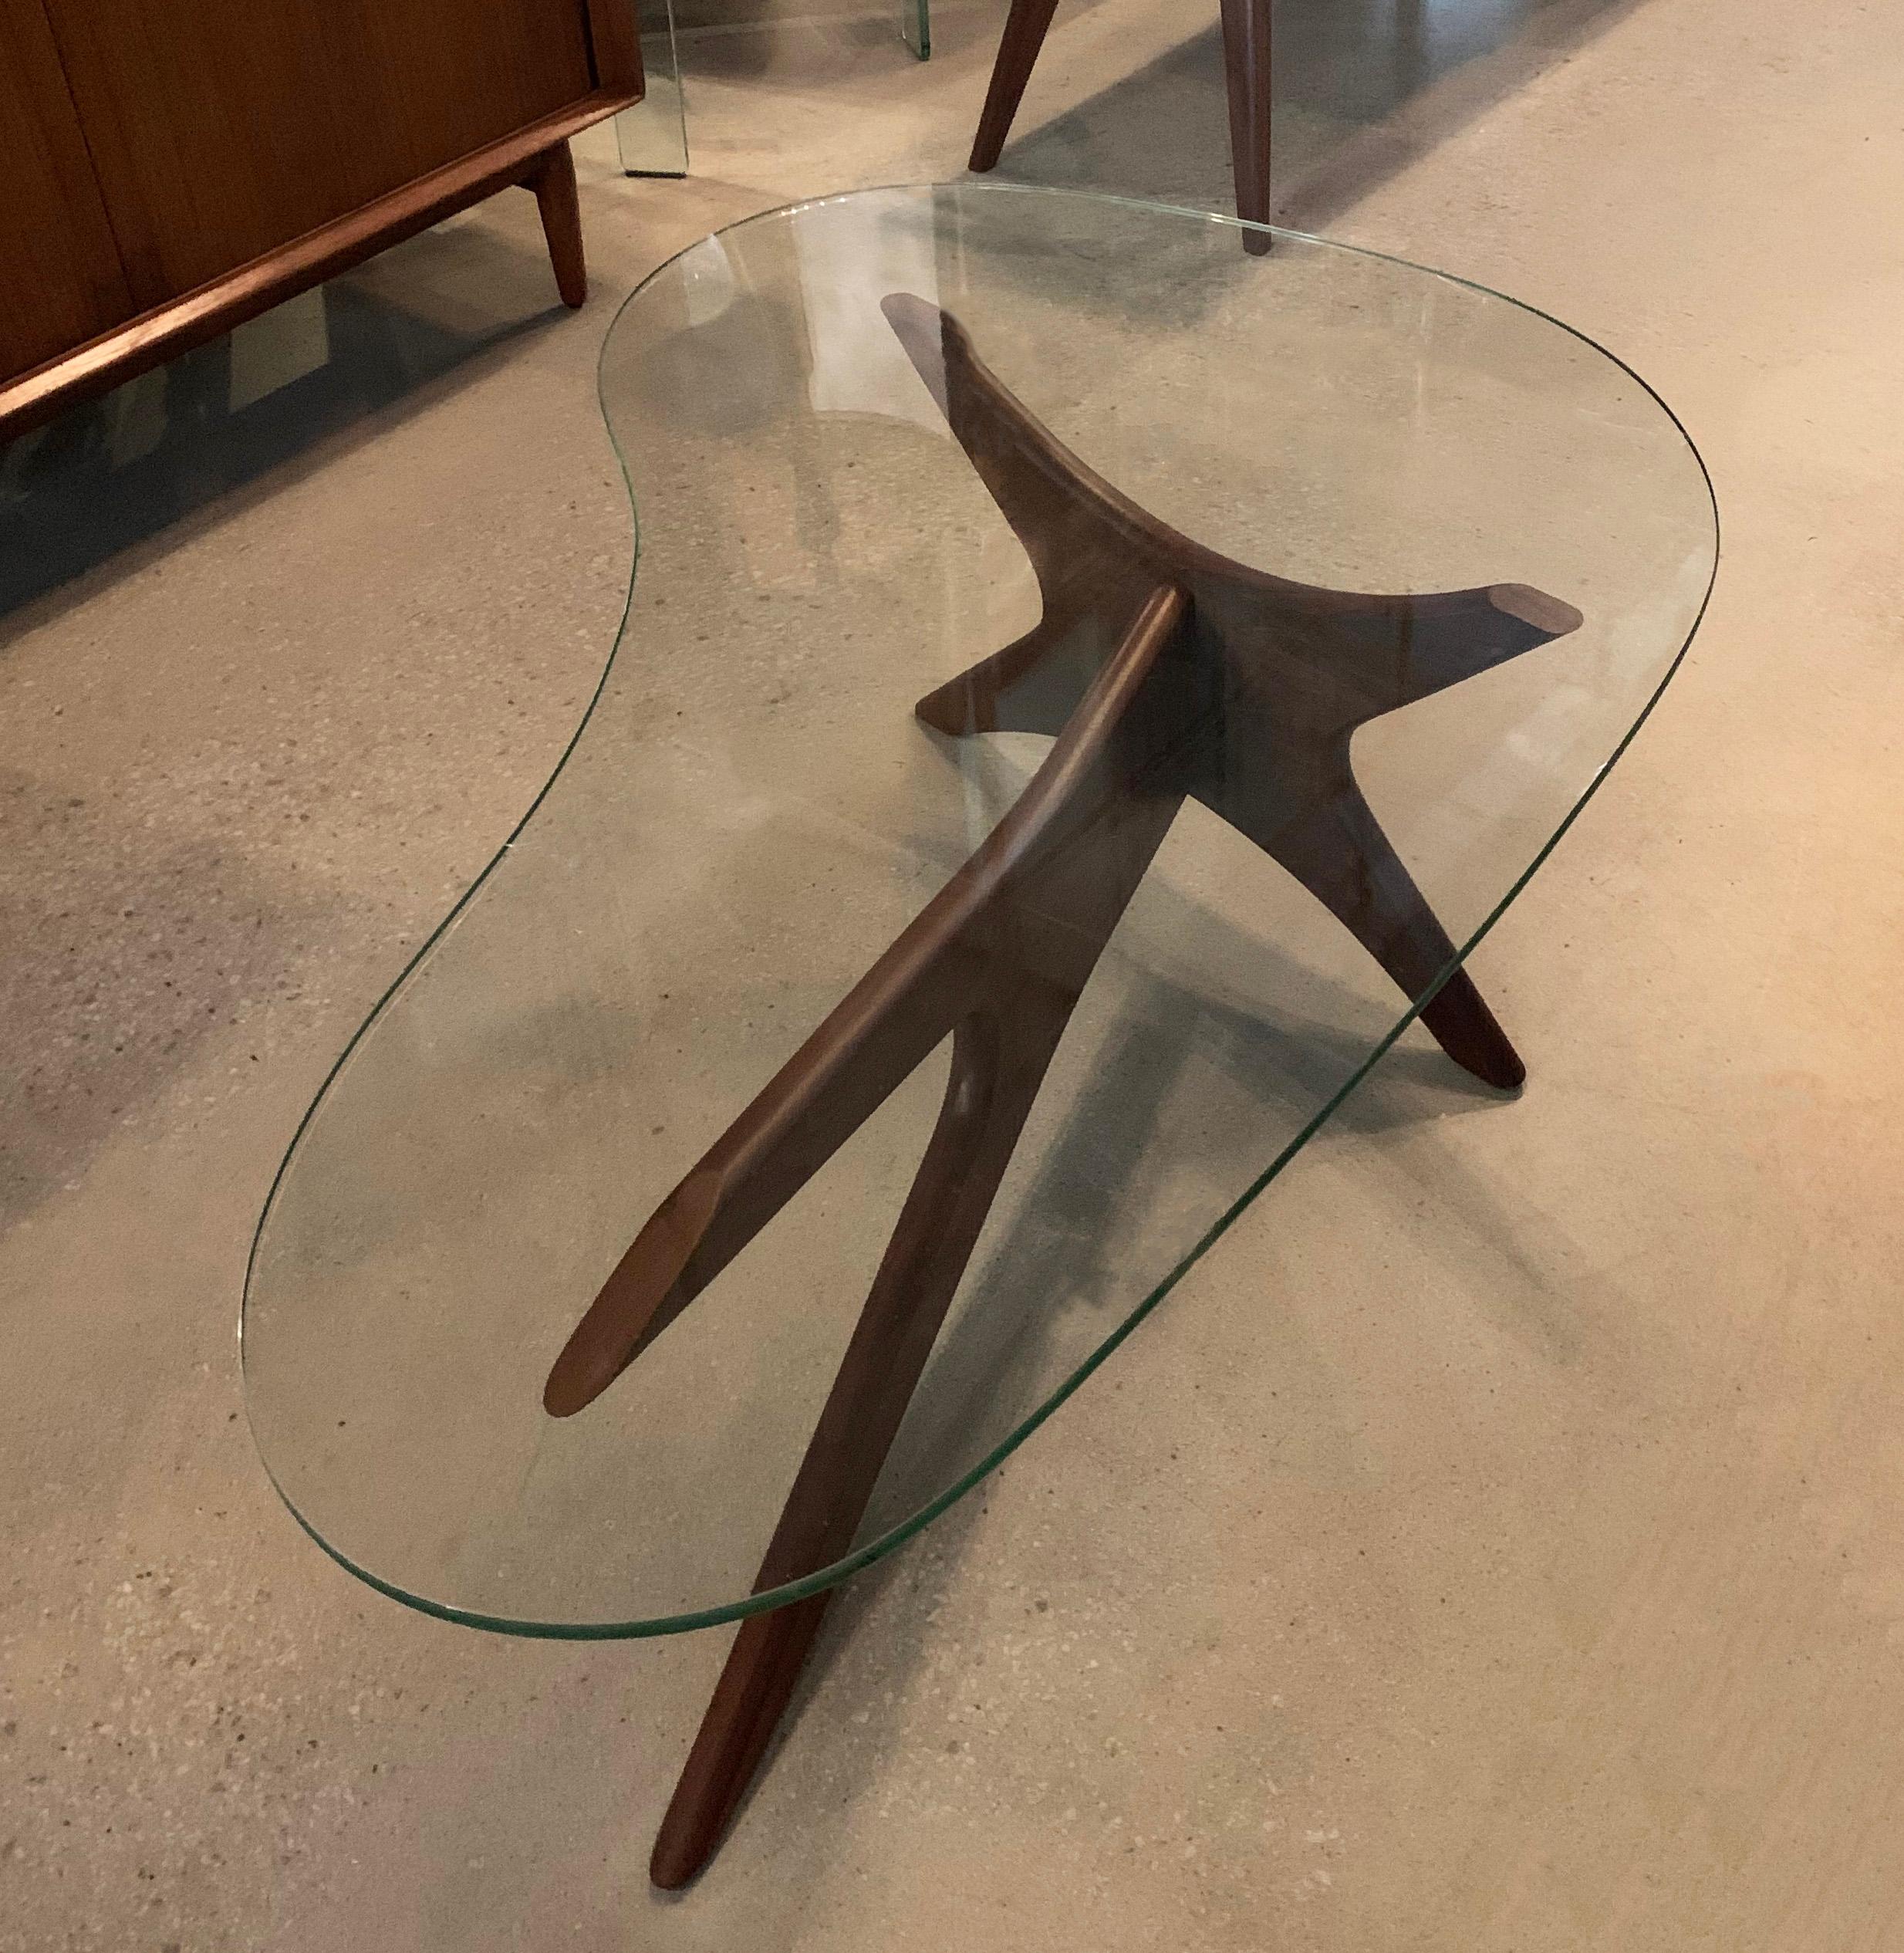 Mid-Century Modern coffee table by Adrian Pearsall for Craft Associates features a walnut boomerang base with biomorphic glass top.